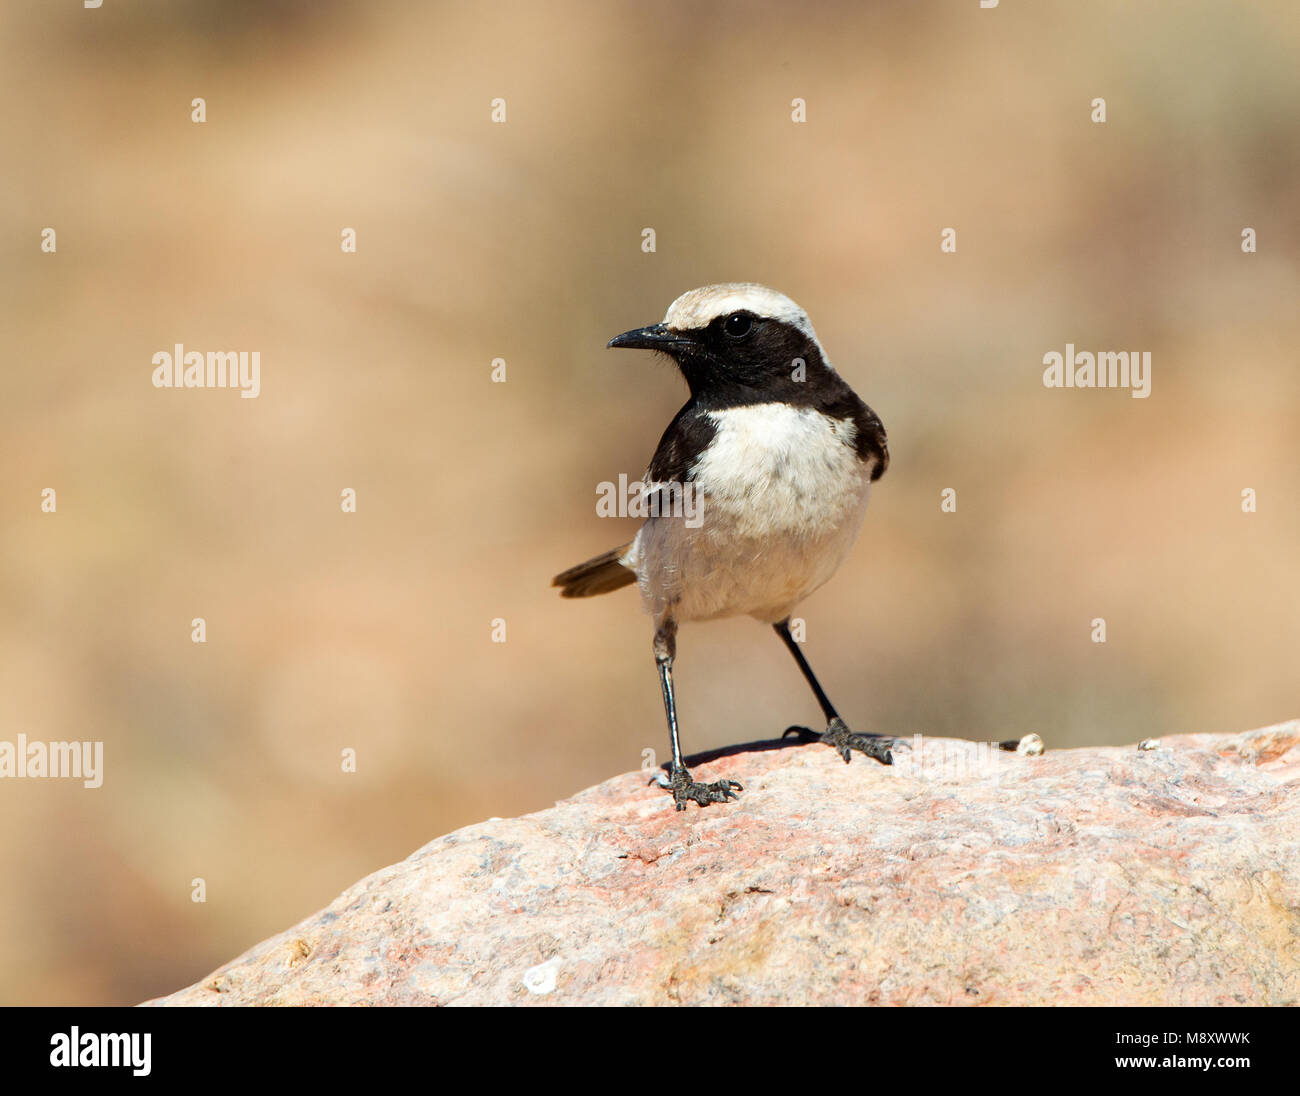 Mannetje Roodstuittapuit zittend; Male Red-rumped Wheatear perched Stock  Photo - Alamy